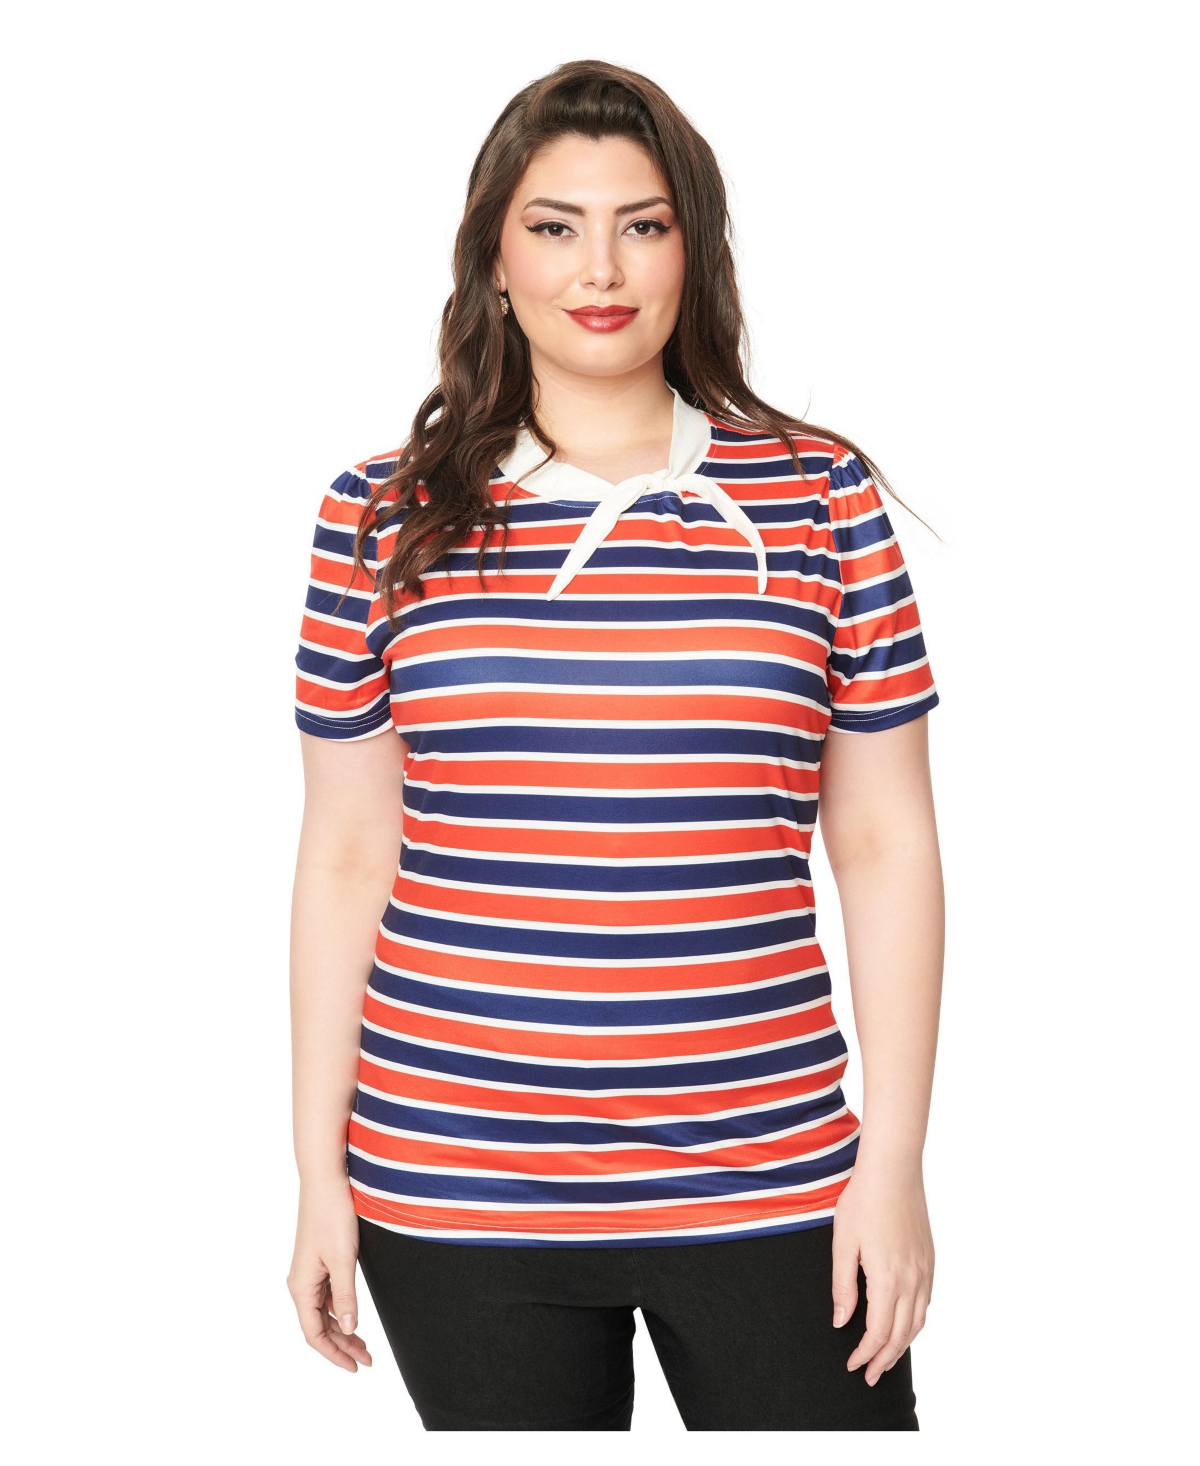 Plus Size Short Sleeve Tie Neck Sweetie Knit Top - Navy/red stripes